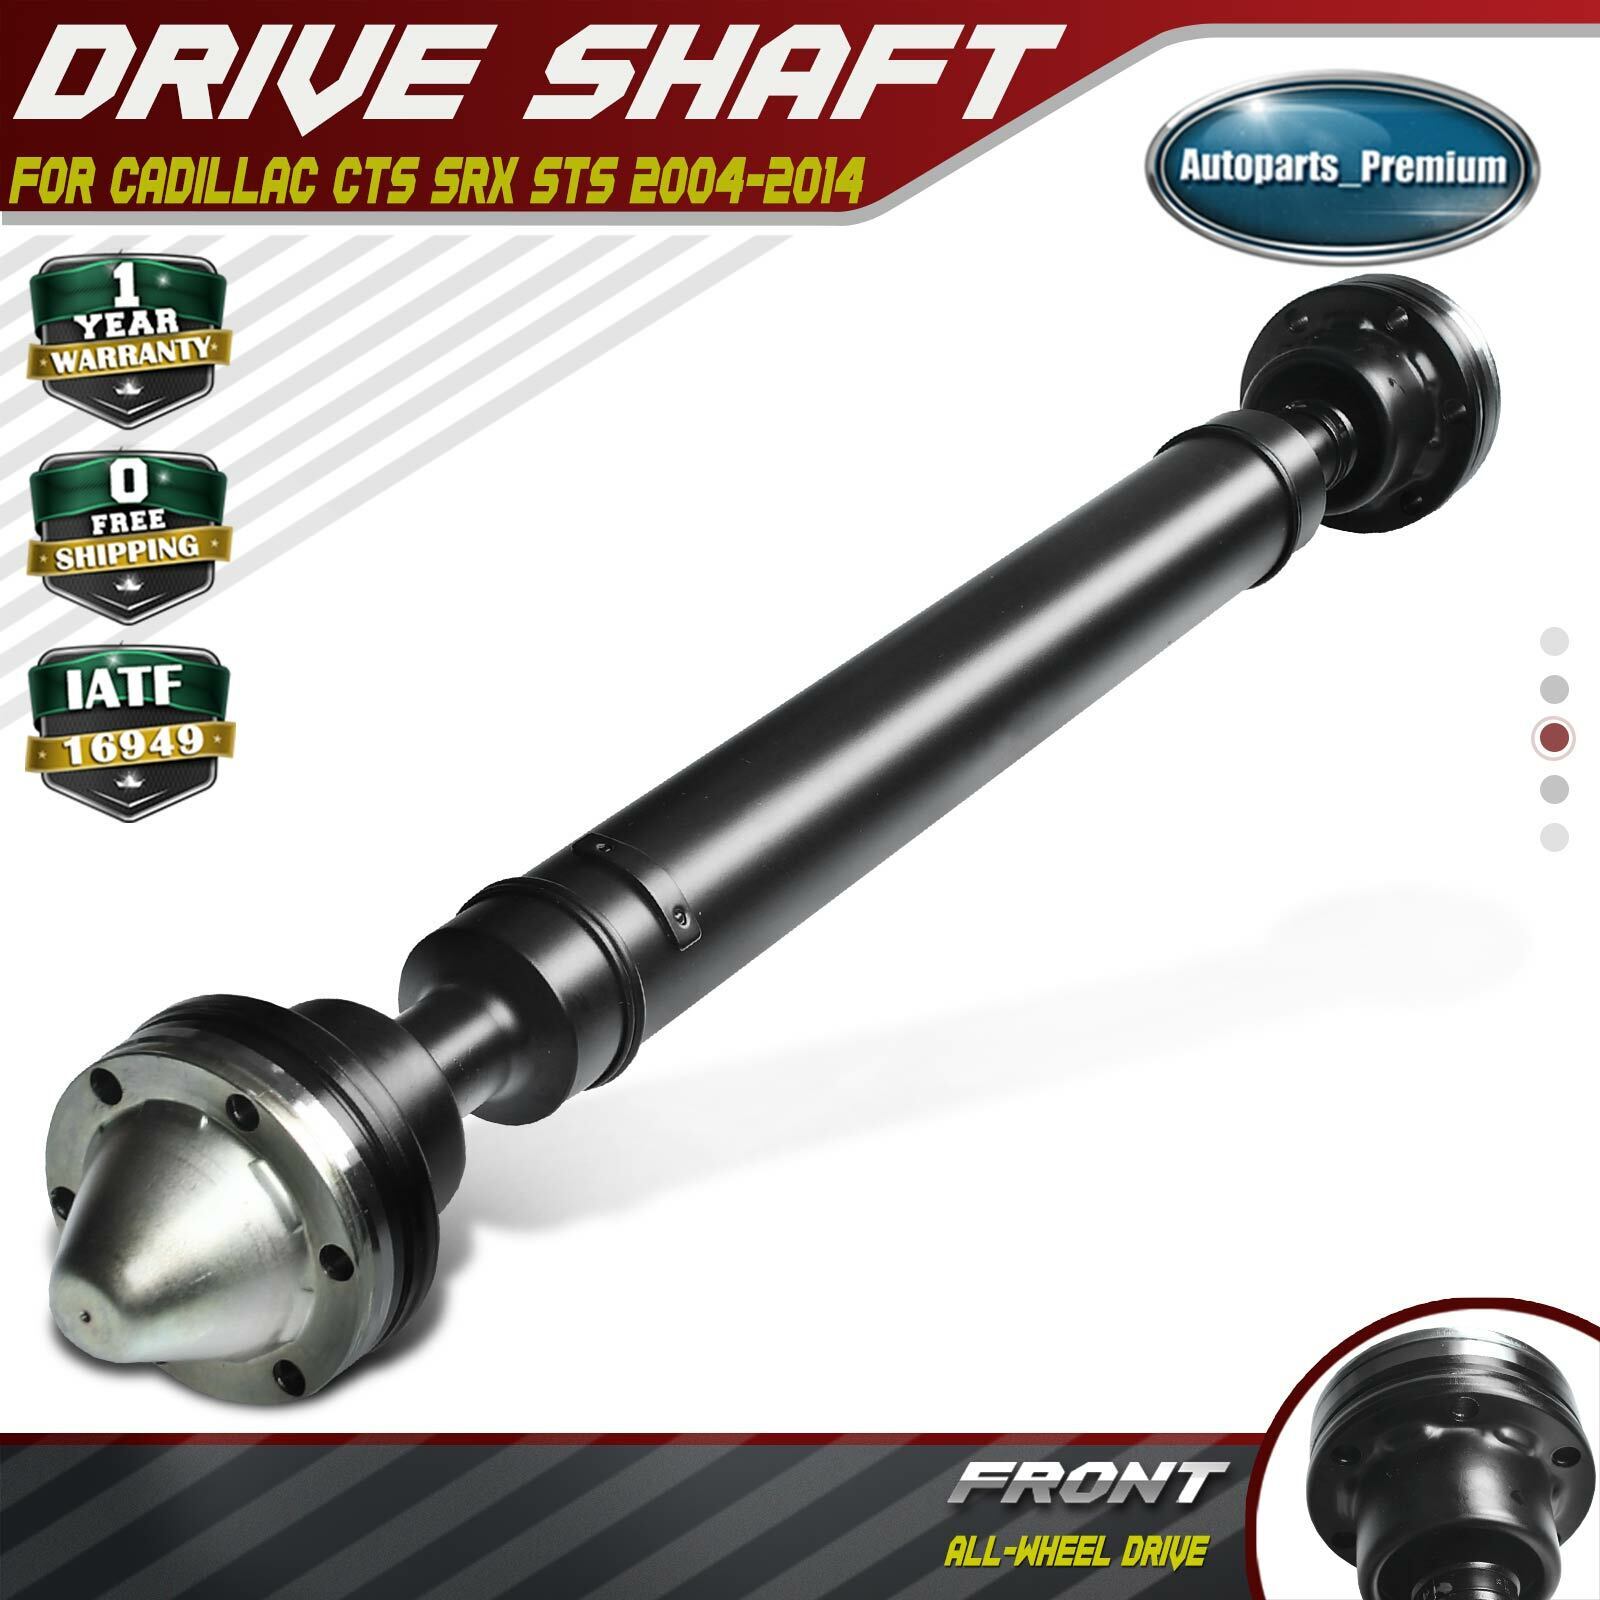 Front Side Drive Shaft Assembly for Cadillac CTS 2008-2014 SRX 2004-2009  STS AWD | eBay